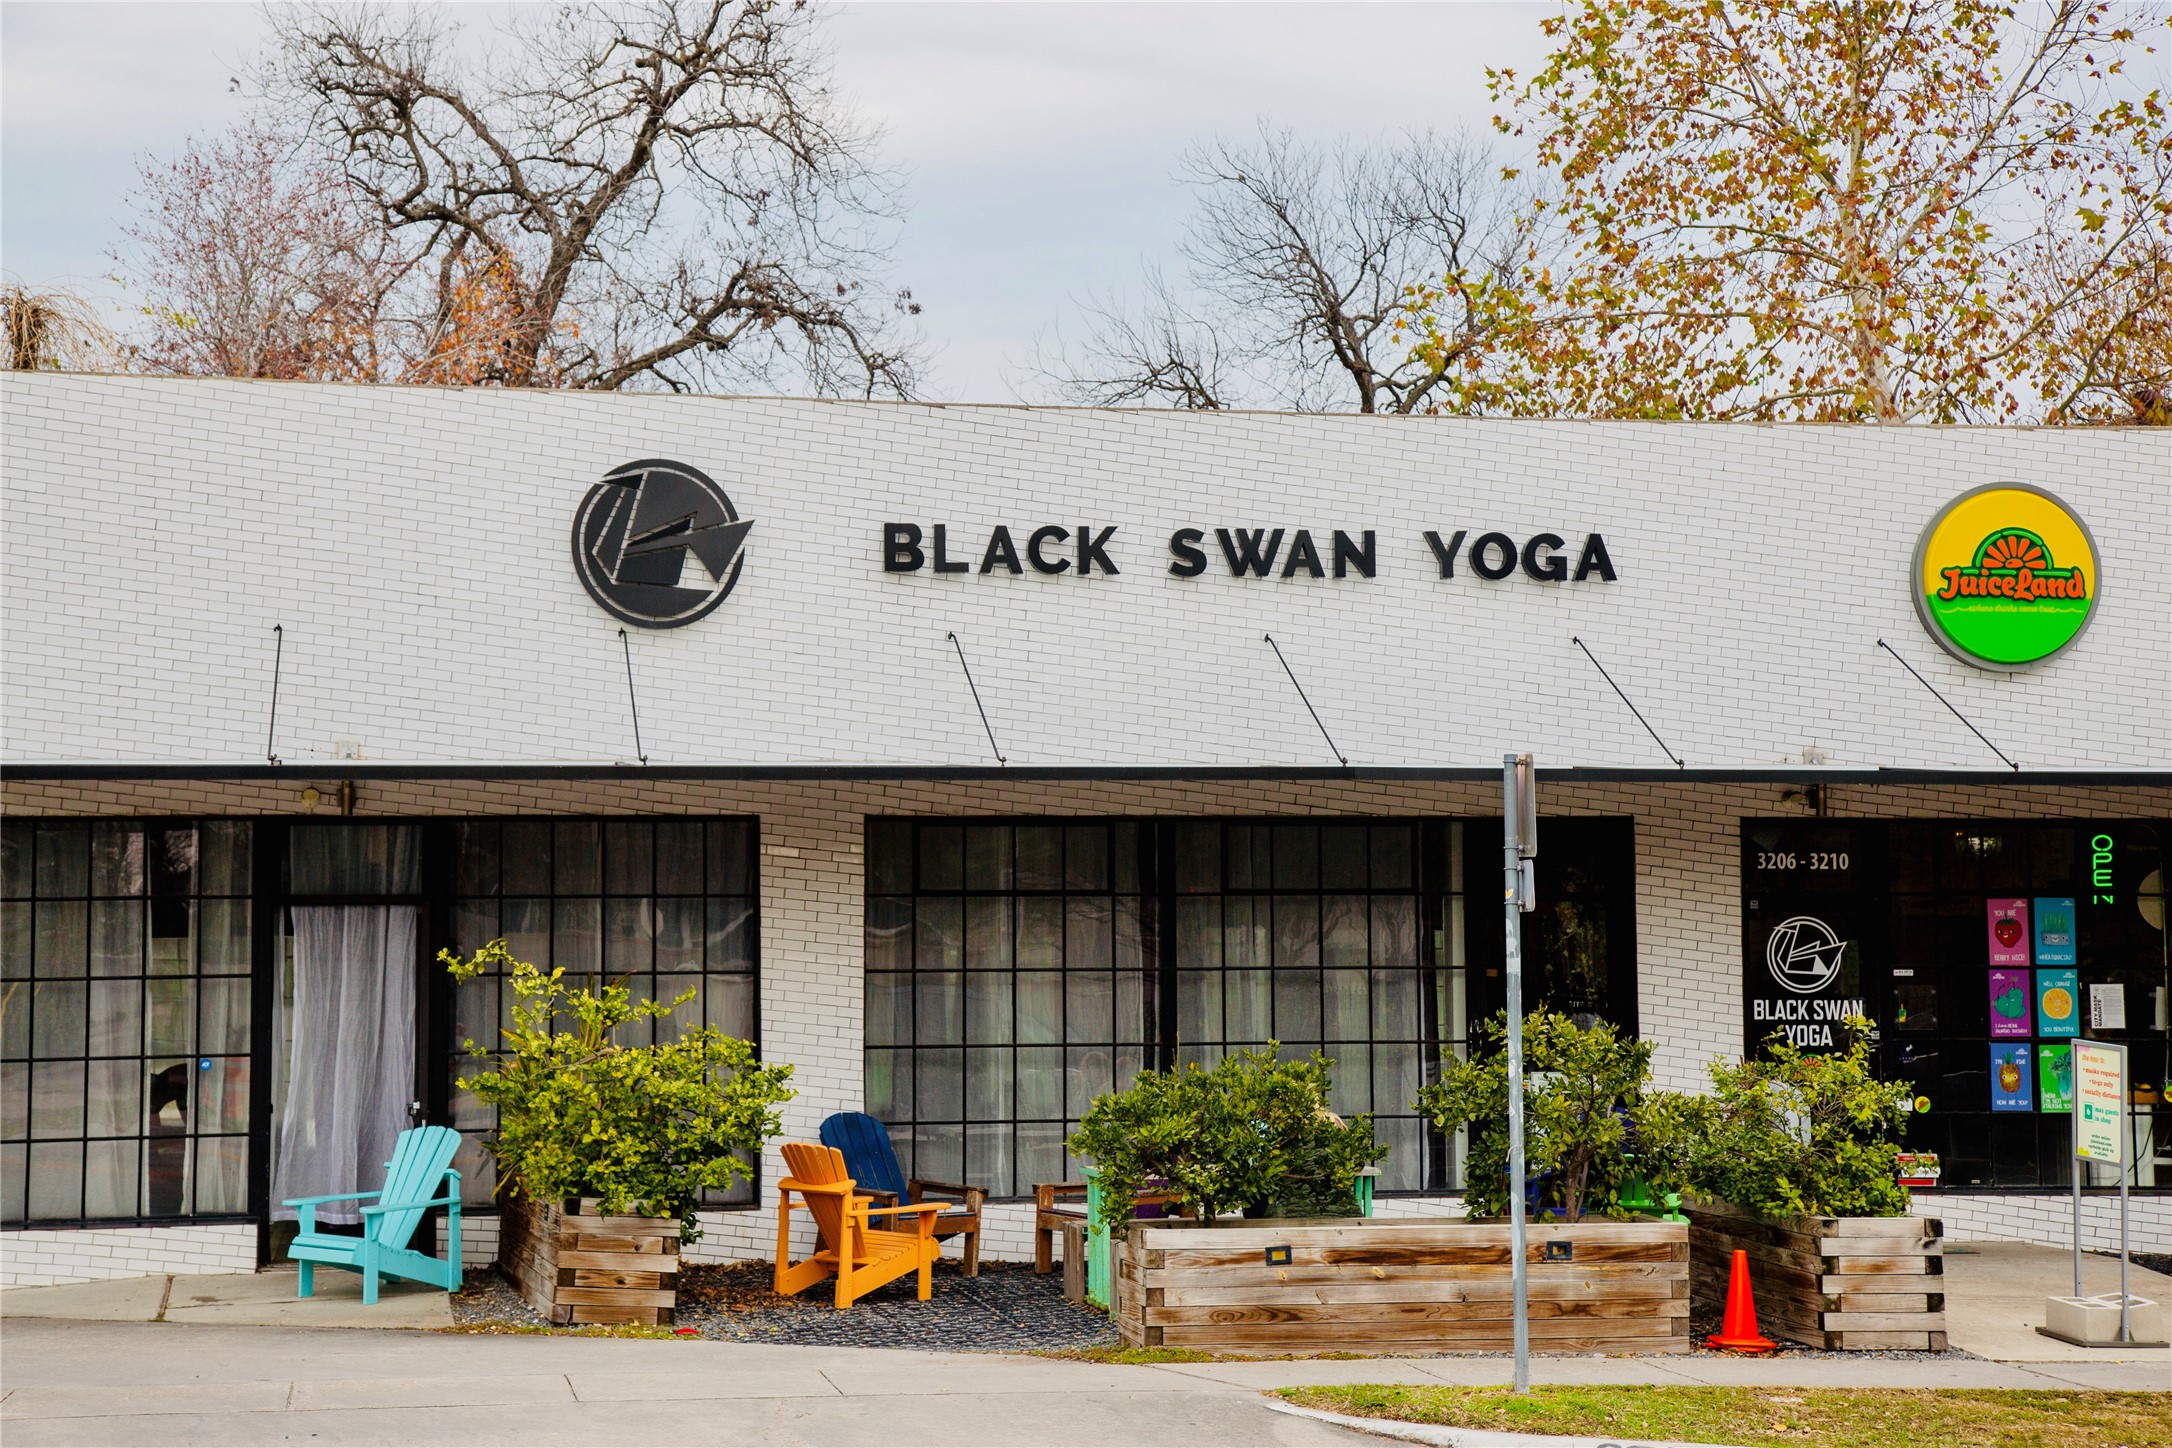 Nearby Black Swan Yoga, offers a tranquil retreat in the heart of the city. Its spacious practice area promotes mindfulness and provides a comfortable yoga experience for all.